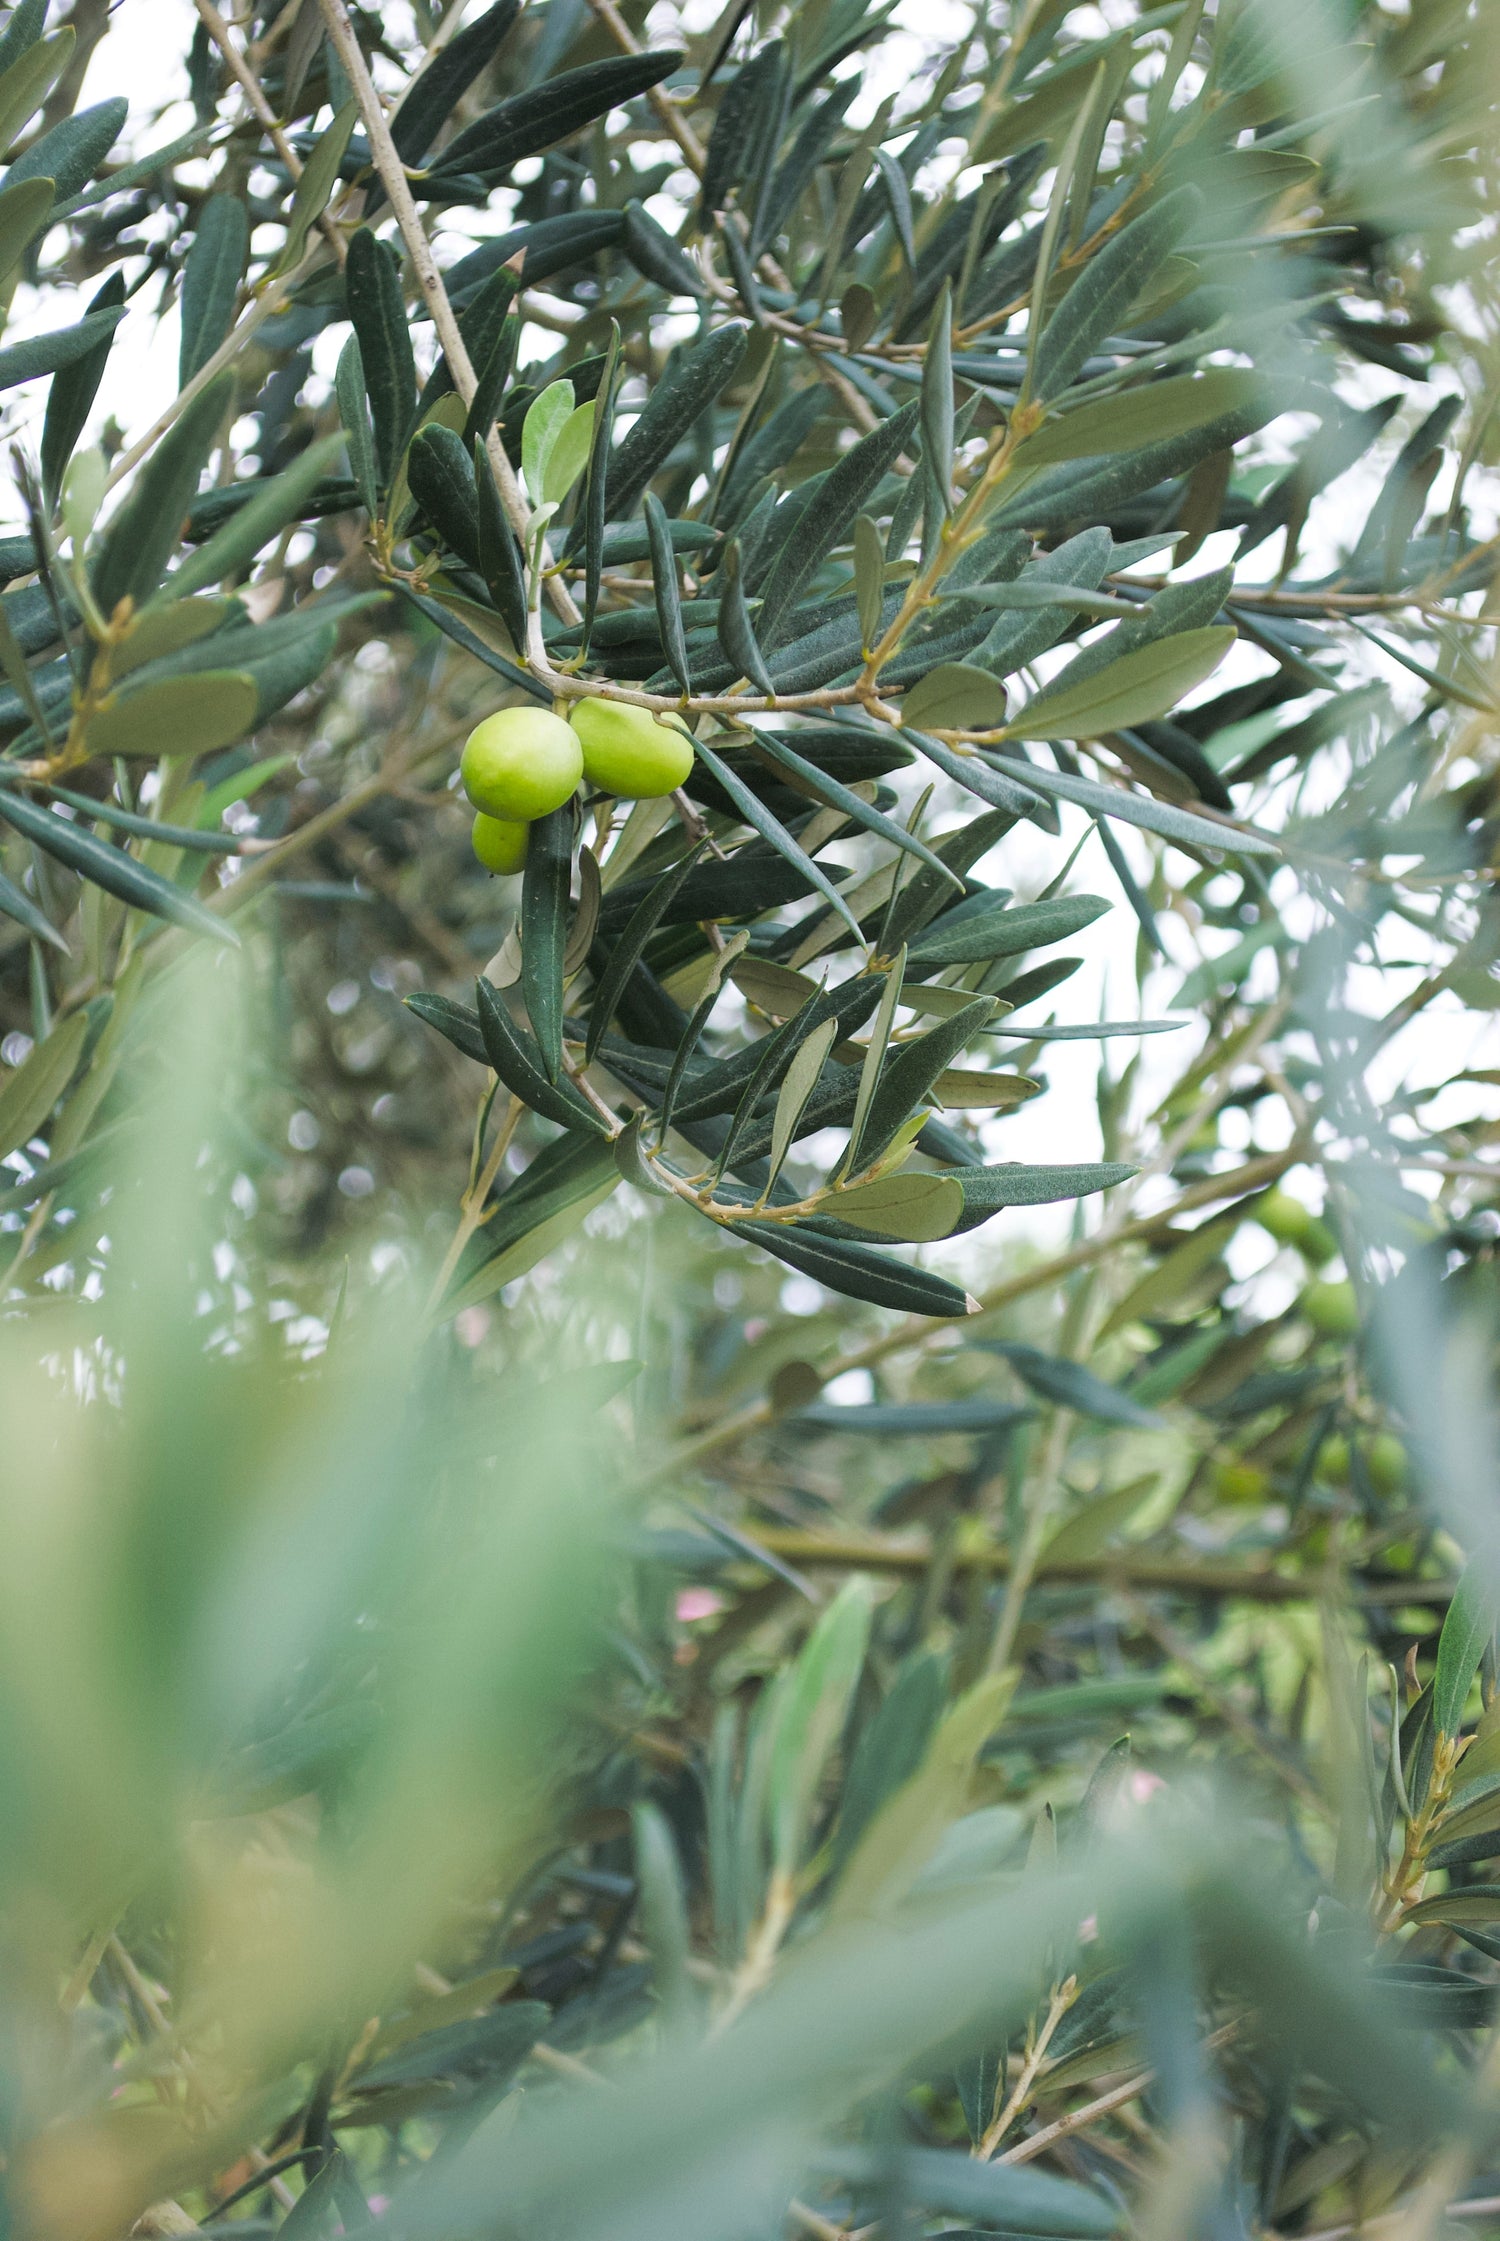 Byron Bay Olive Co. produces a wide range of Mediterranean products such as antipasti, organic olive oil